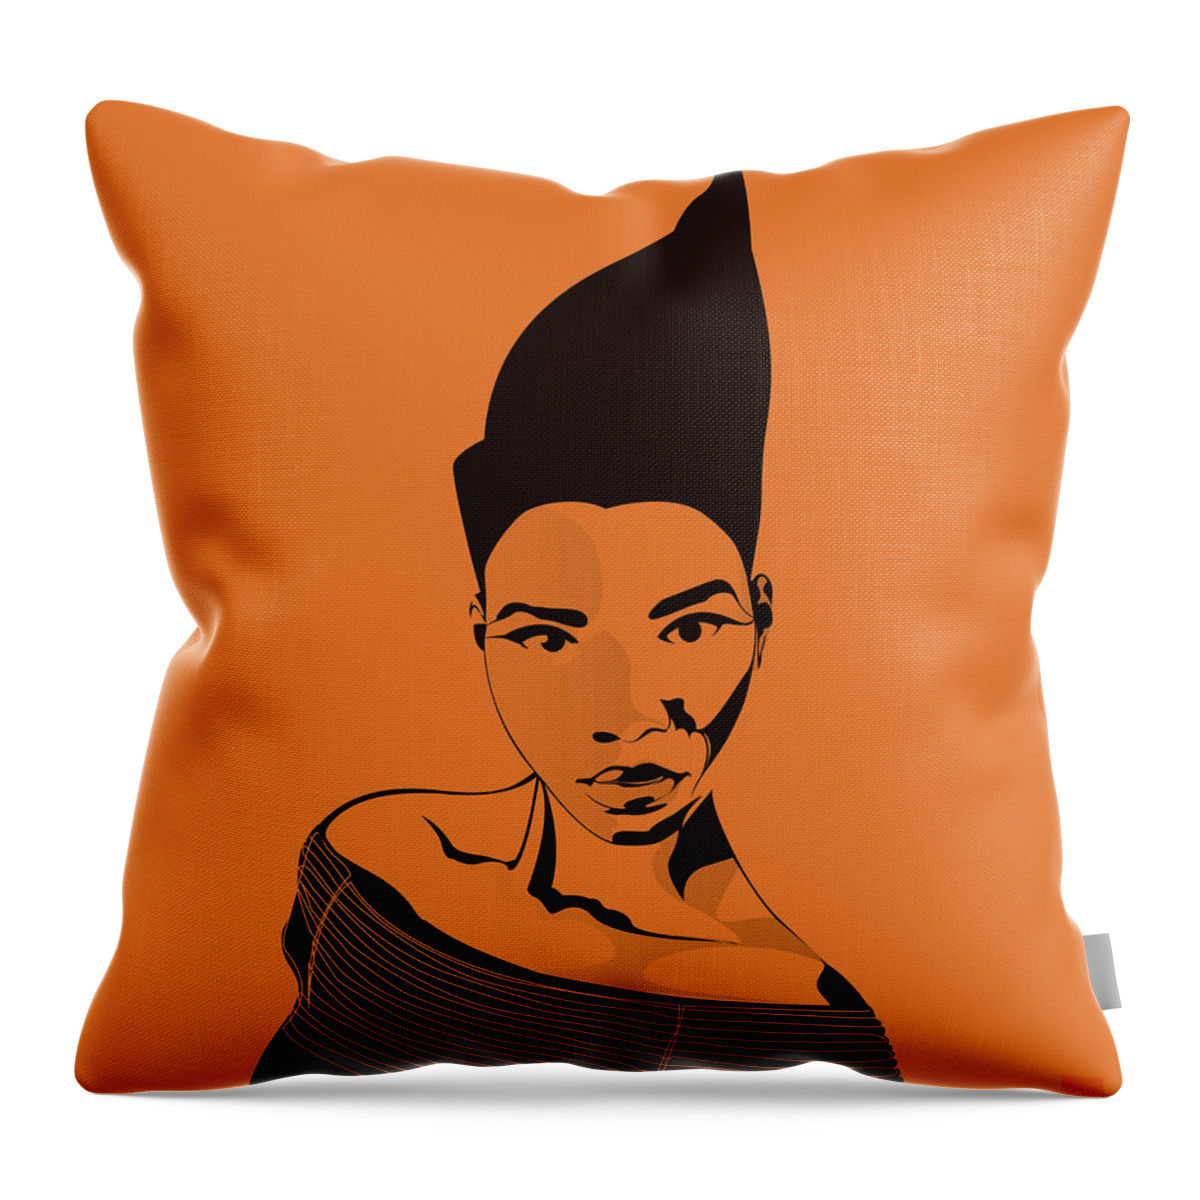 Orange Throw Pillow featuring the digital art Fierce by Scheme Of Things Graphics